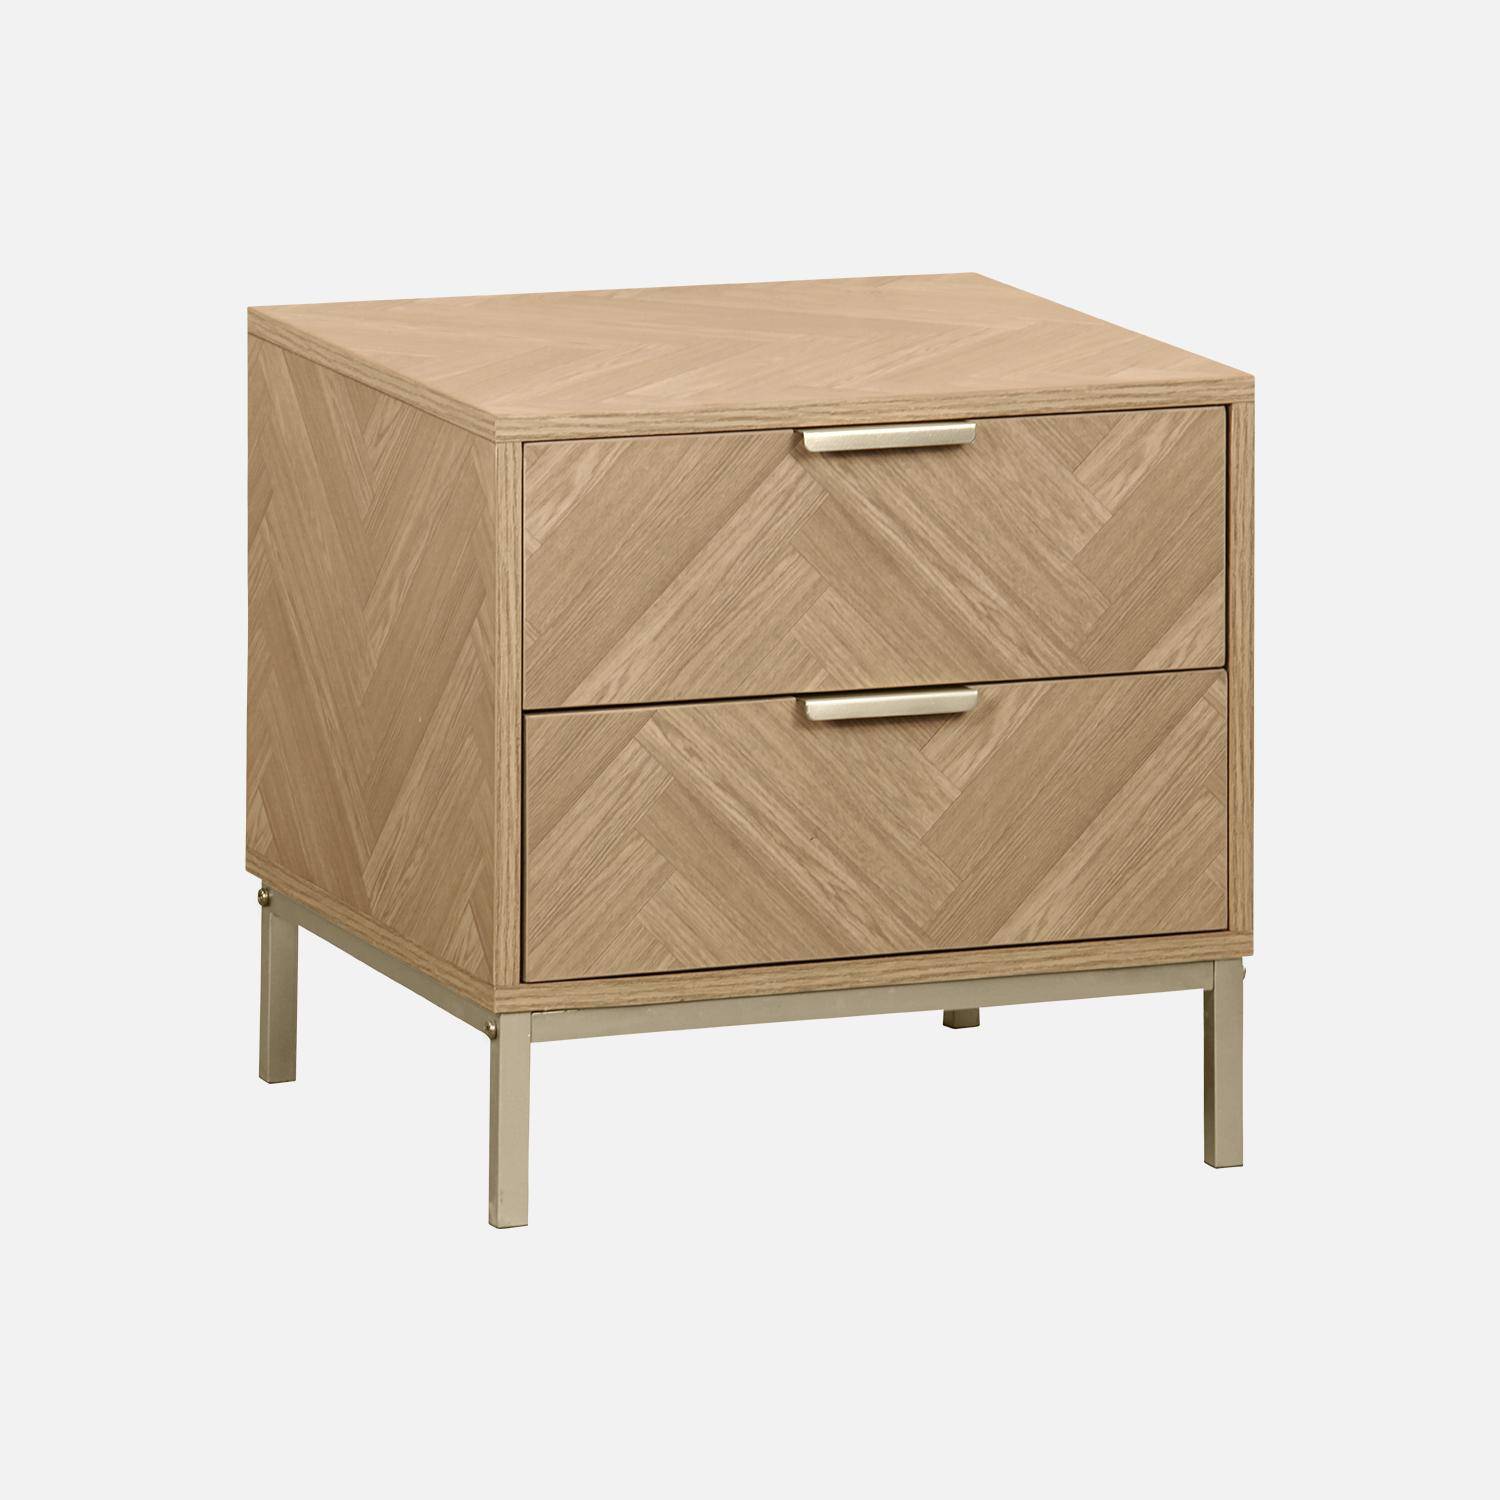 Pair of  contemporary Herringbone bedside table with 2 drawers Photo3